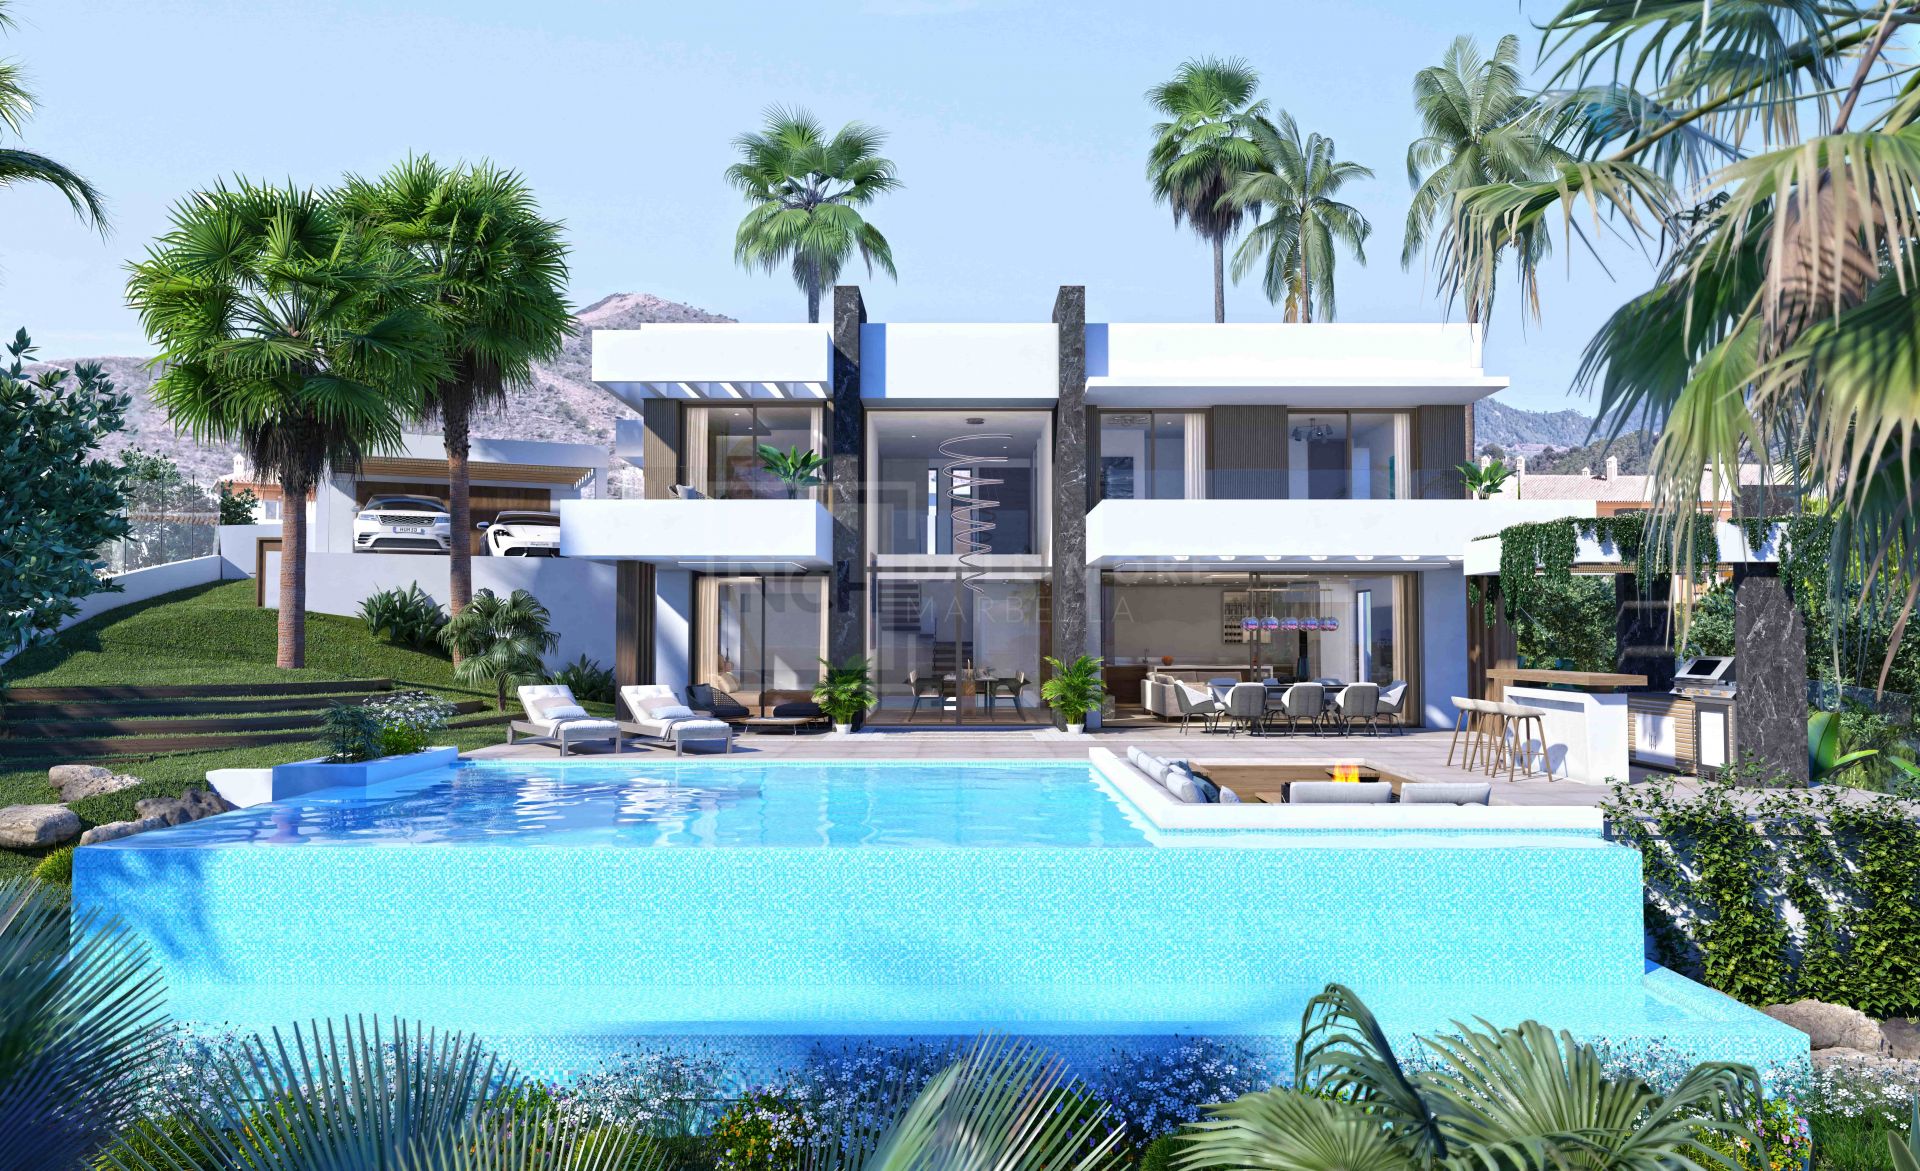 THE HEIGHTS - LUXURY VILLAS FOR SALE IN ESTEPONA